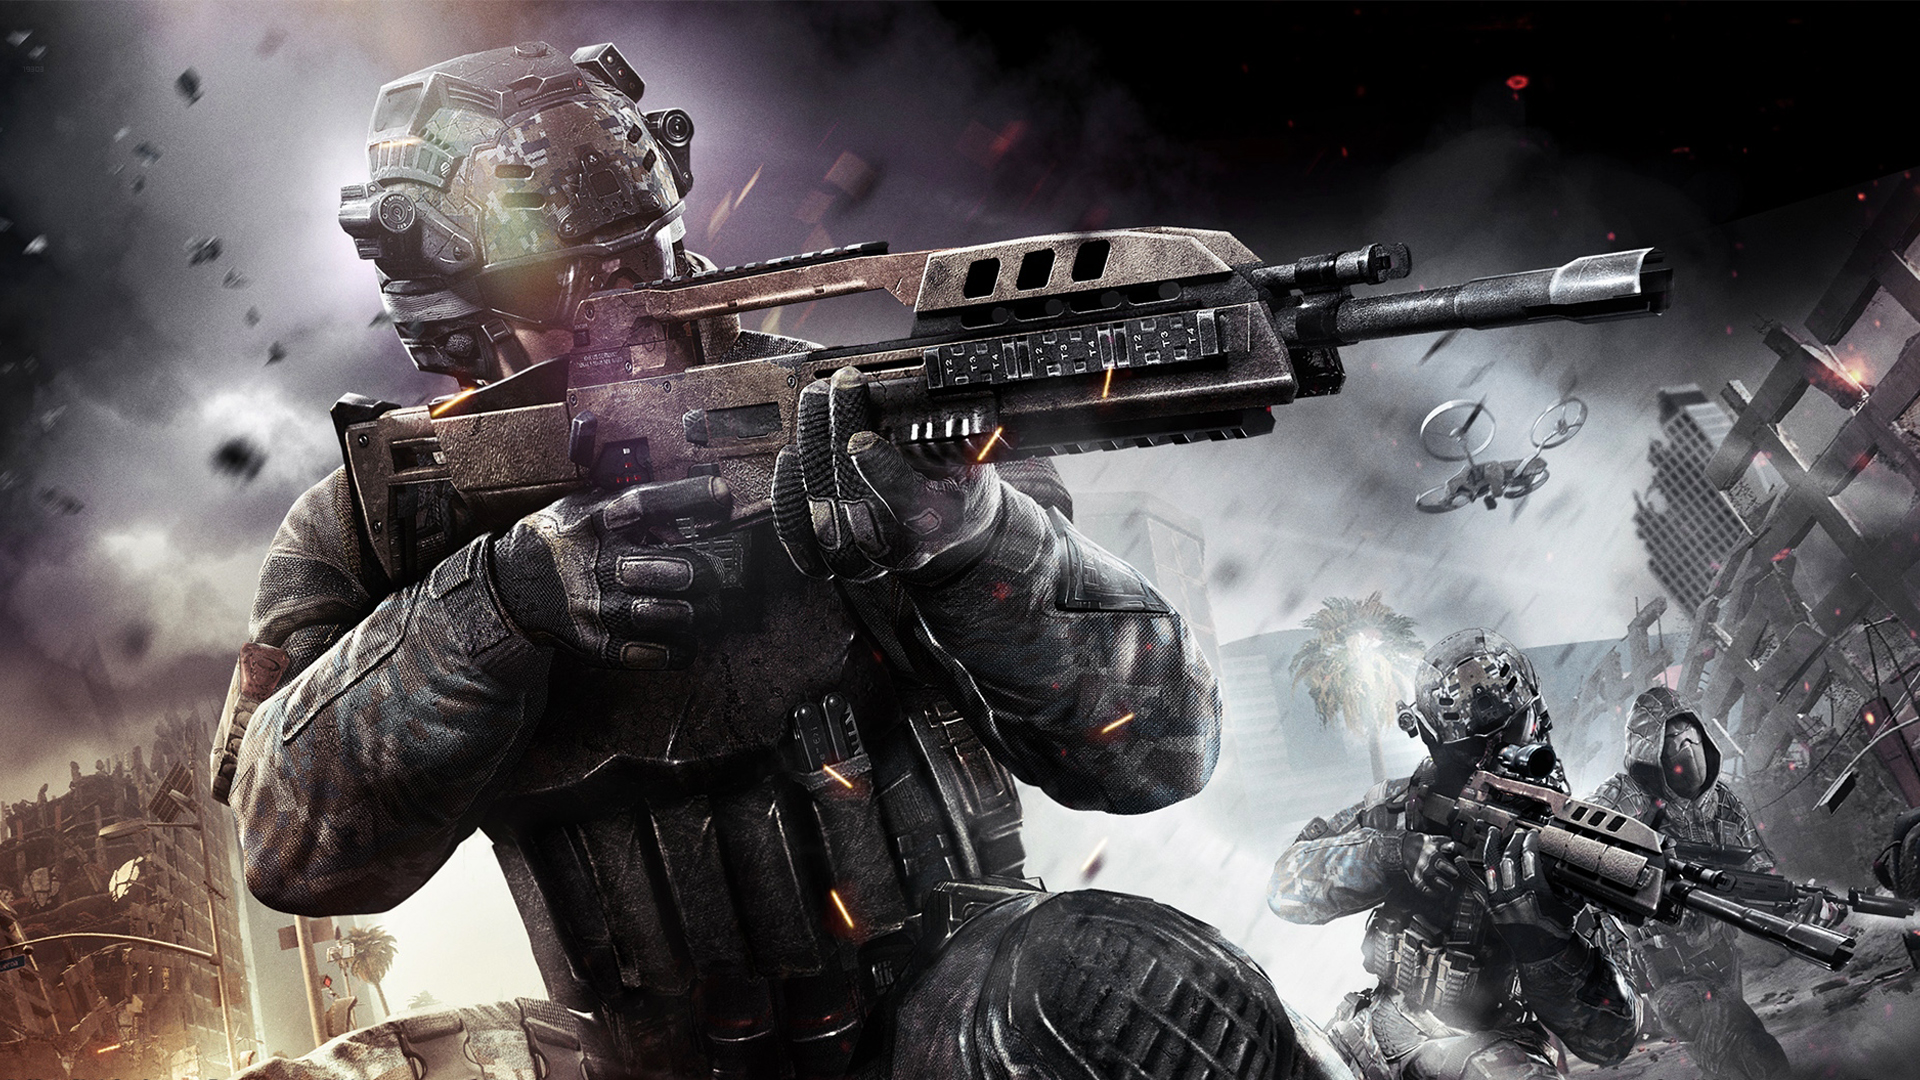 Call Of Duty Black Ops 2 Wallpaper 761066 1920x1080px by Colin 1920x1080